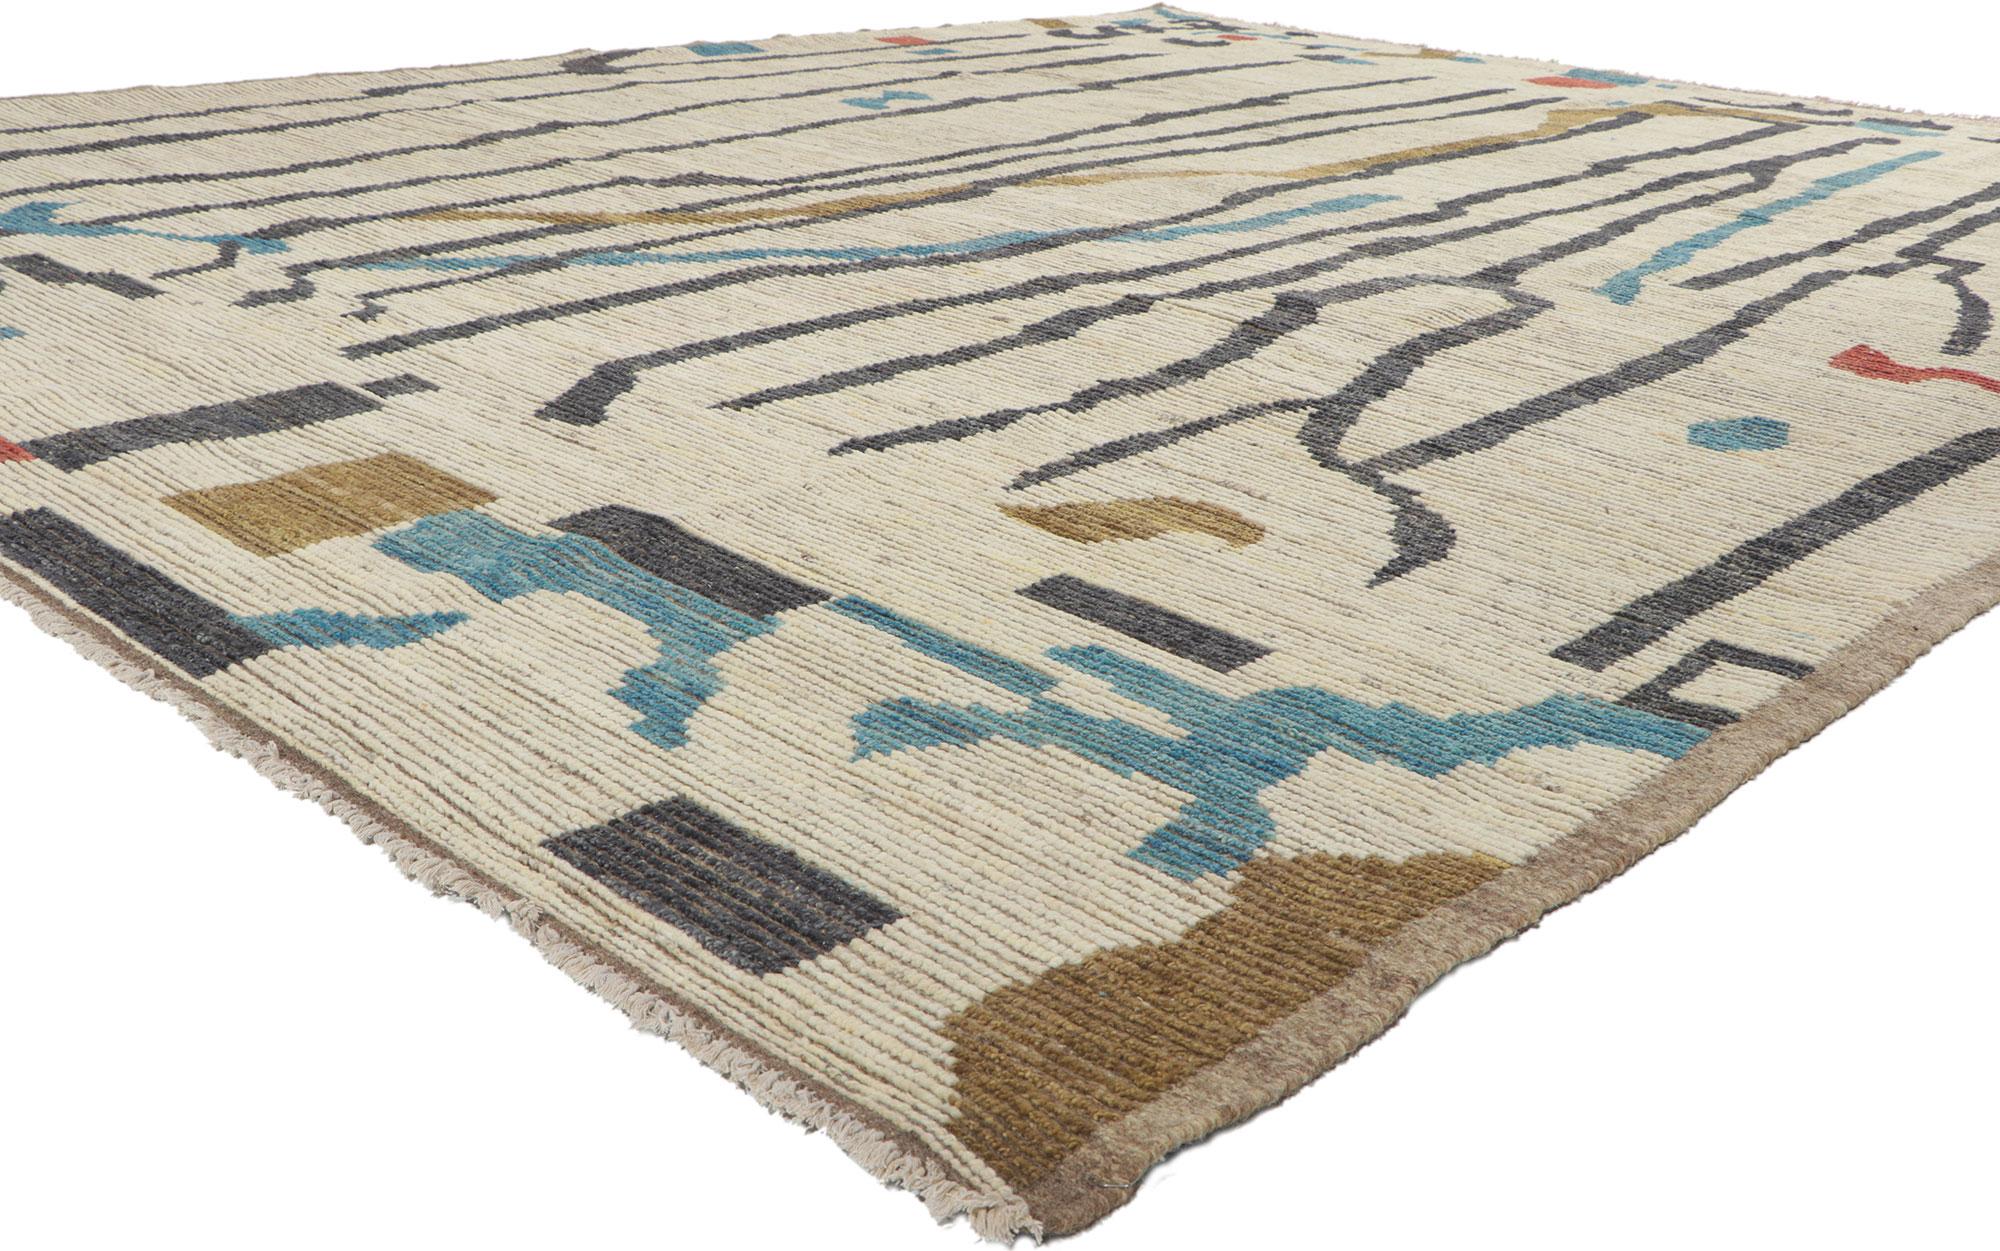 80955 New Contemporary Moroccan Rug Inspired by Willem De Kooning, 10'07 x 12'10. Showcasing an expressive linear design, incredible detail and texture, this hand knotted wool contemporary area rug is a captivating vision of woven beauty. The